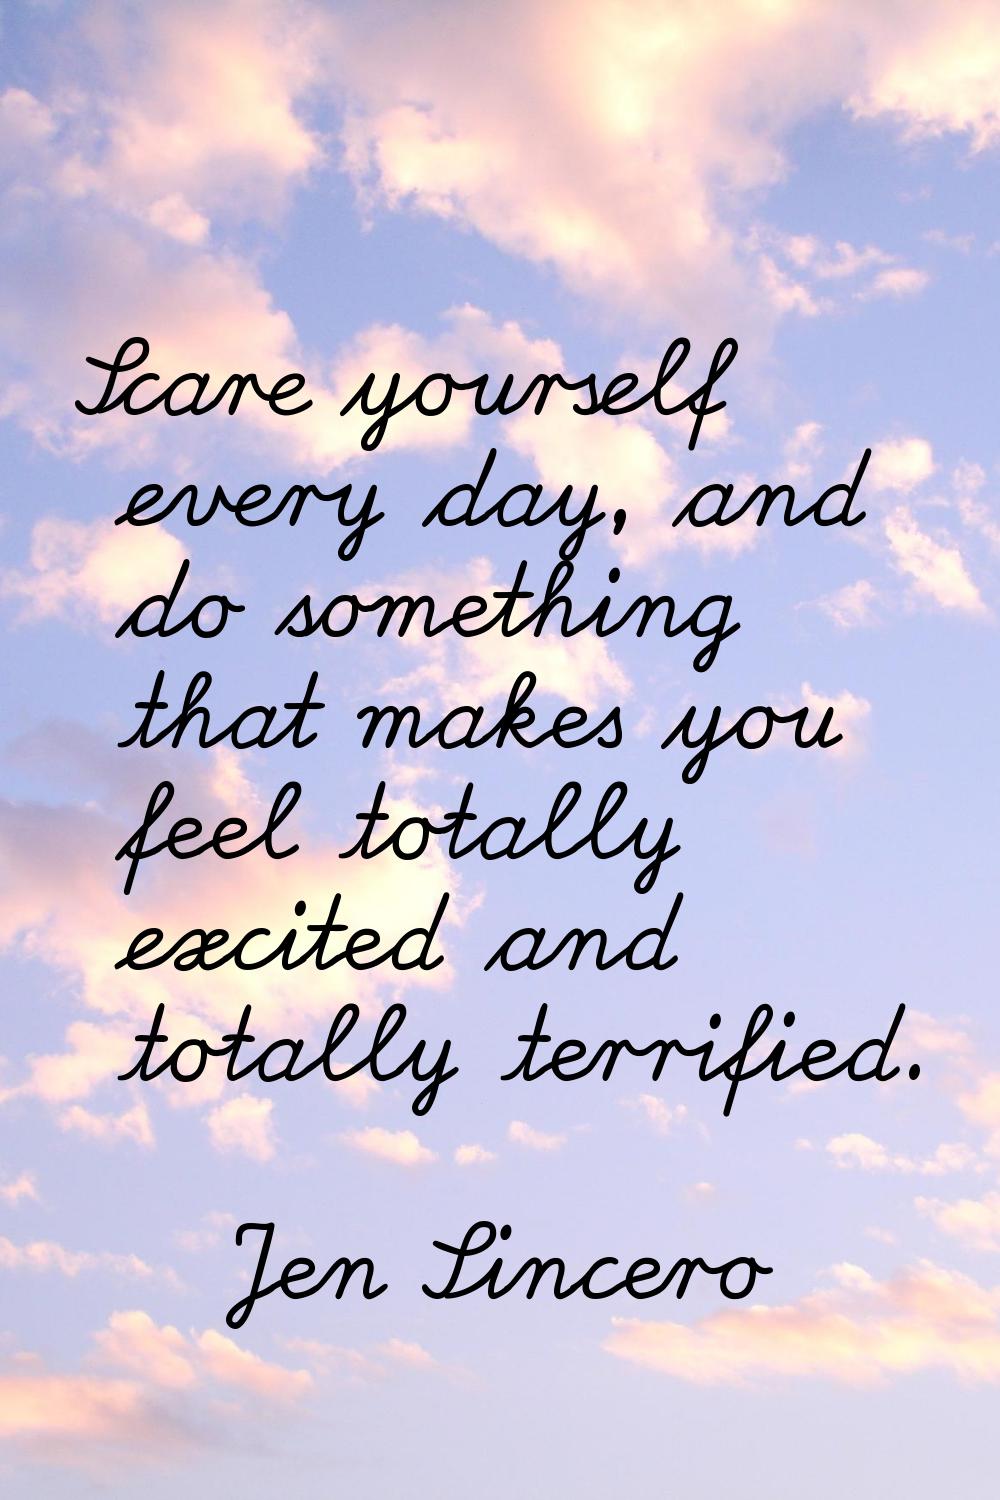 Scare yourself every day, and do something that makes you feel totally excited and totally terrifie